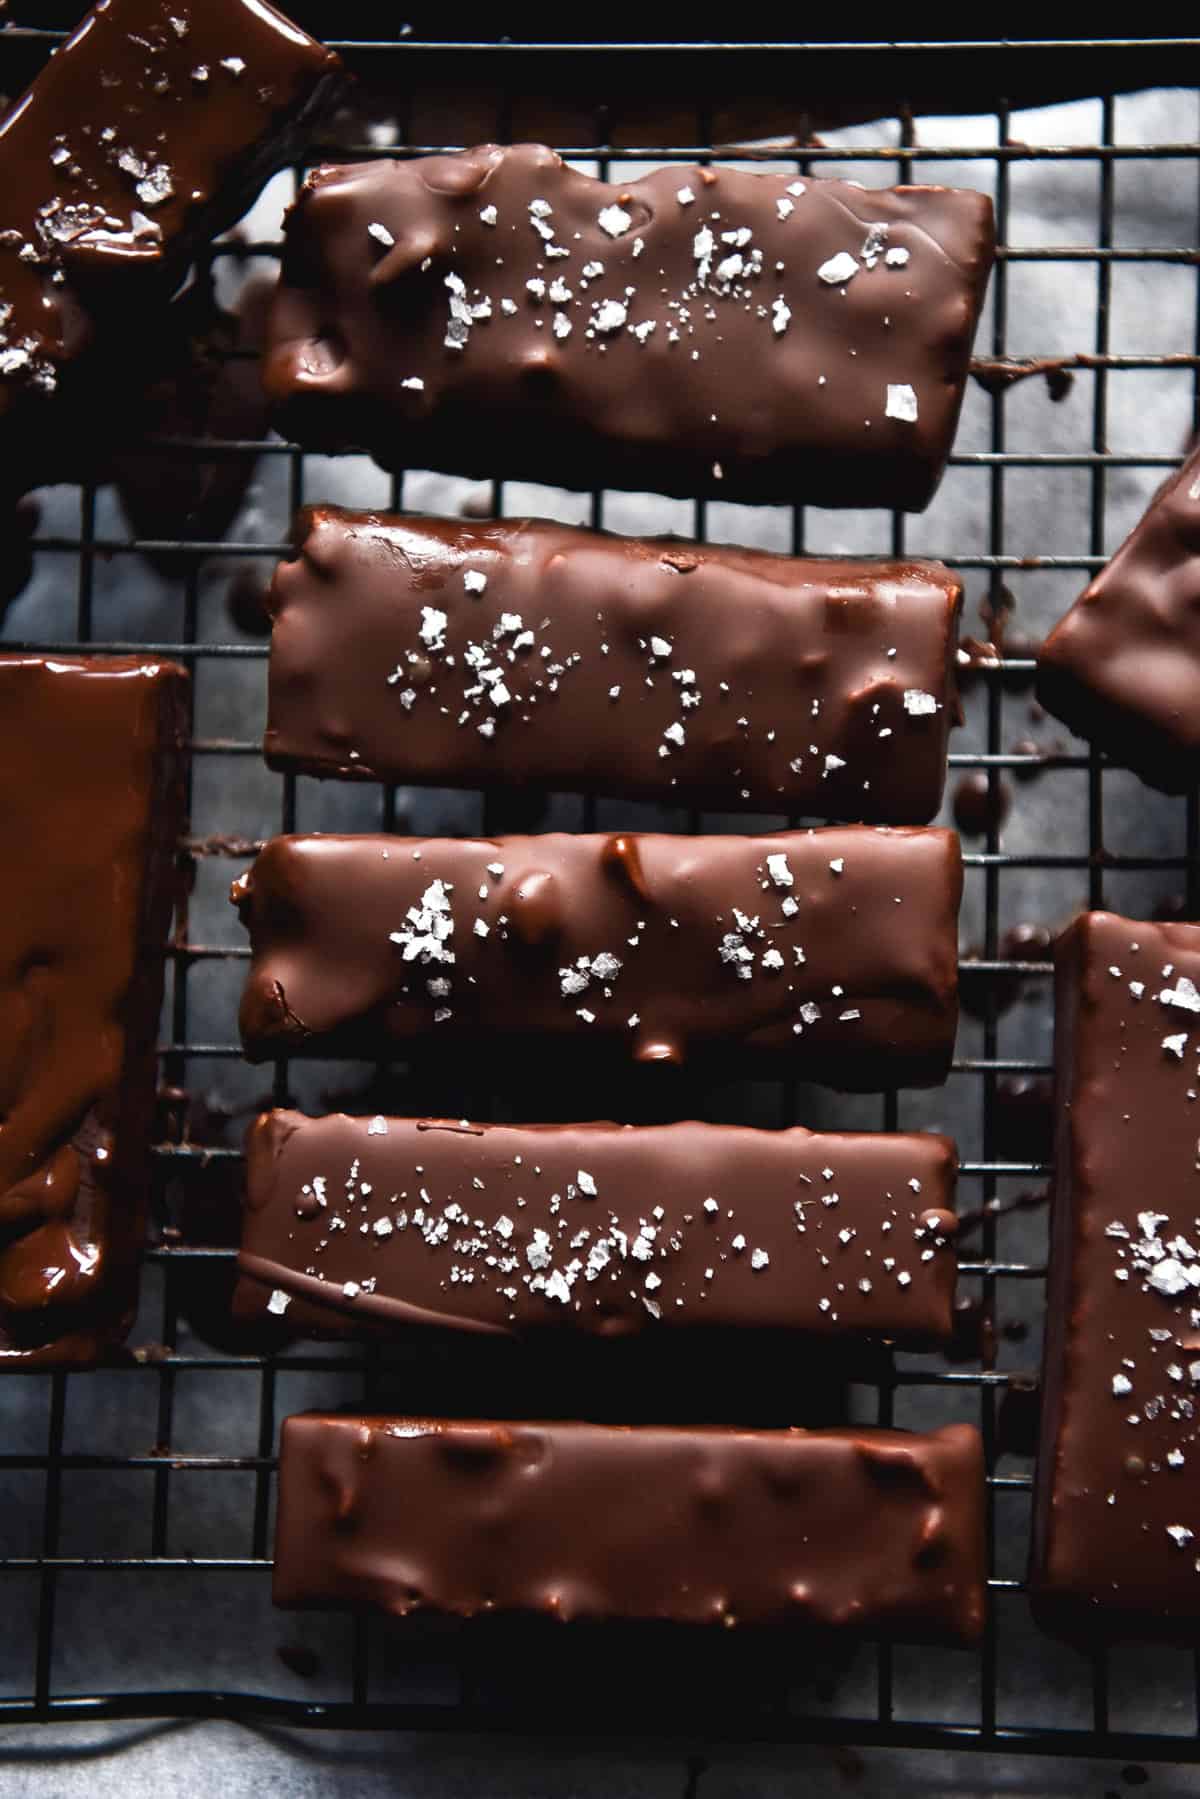 An aerial moody image of chocolate peanut butter bars on a cake rack. The bars are covered in dark chocolate and sprinkled with sea salt flakes.